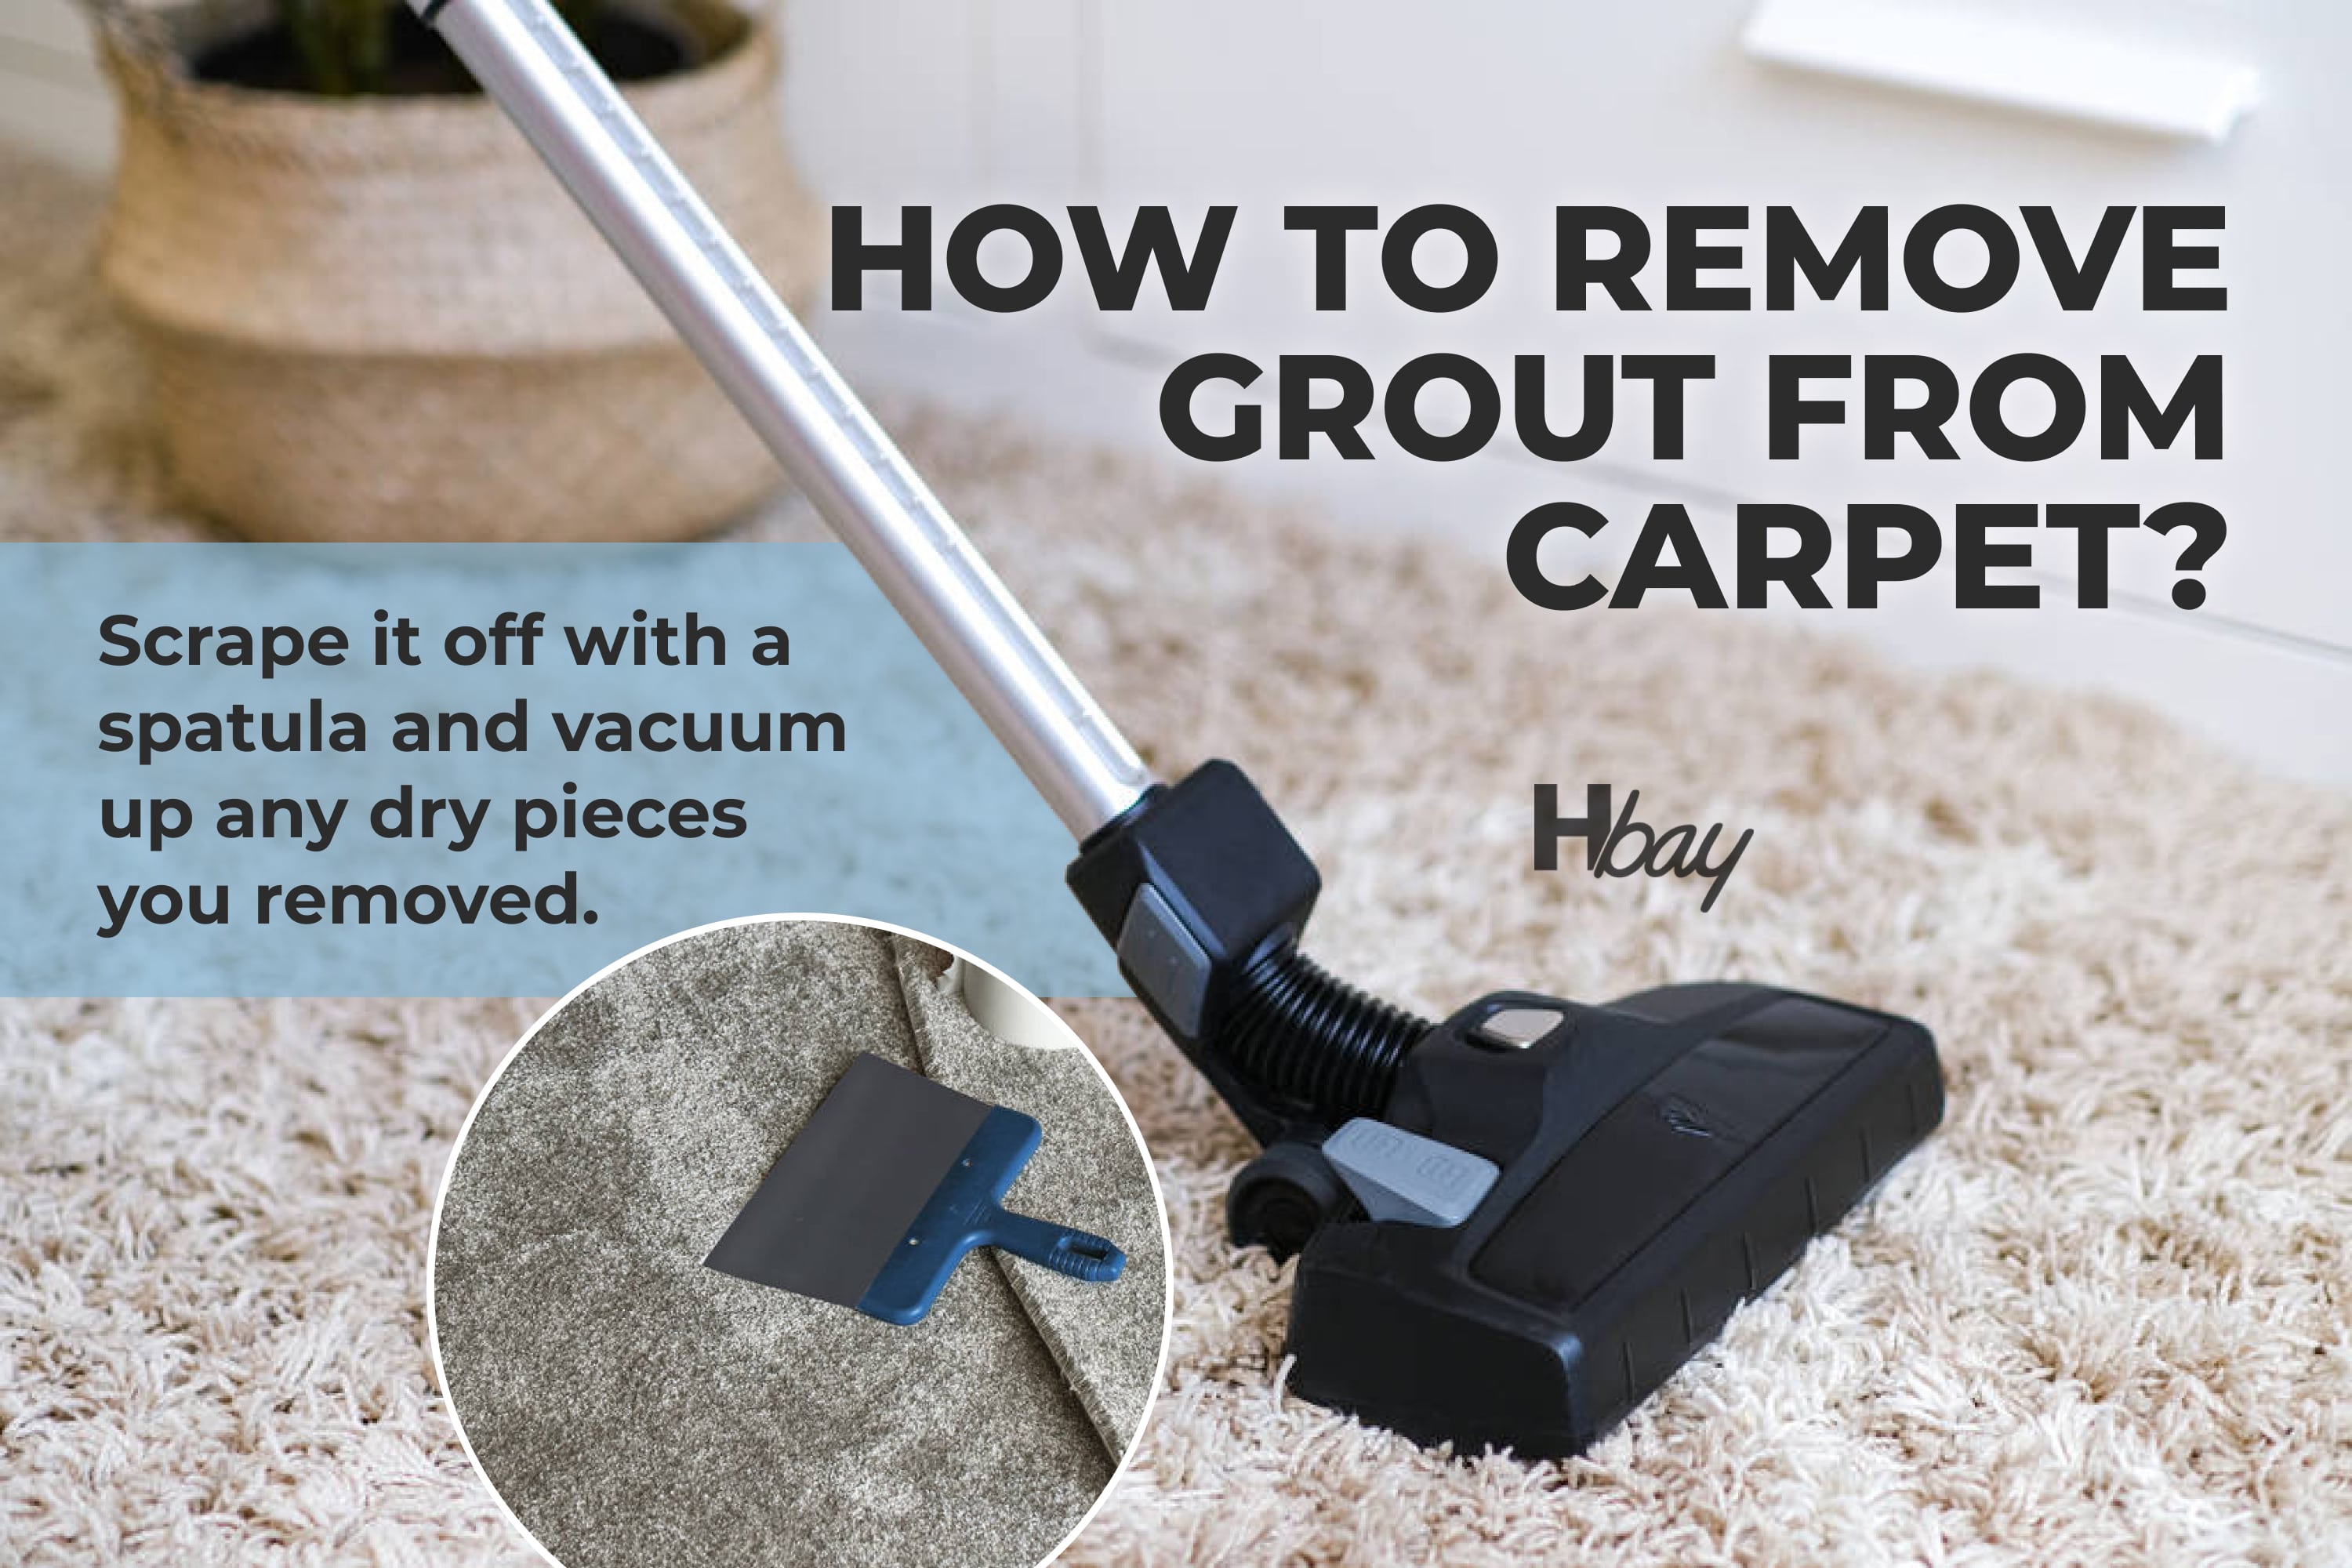 How to remove grout from carpet